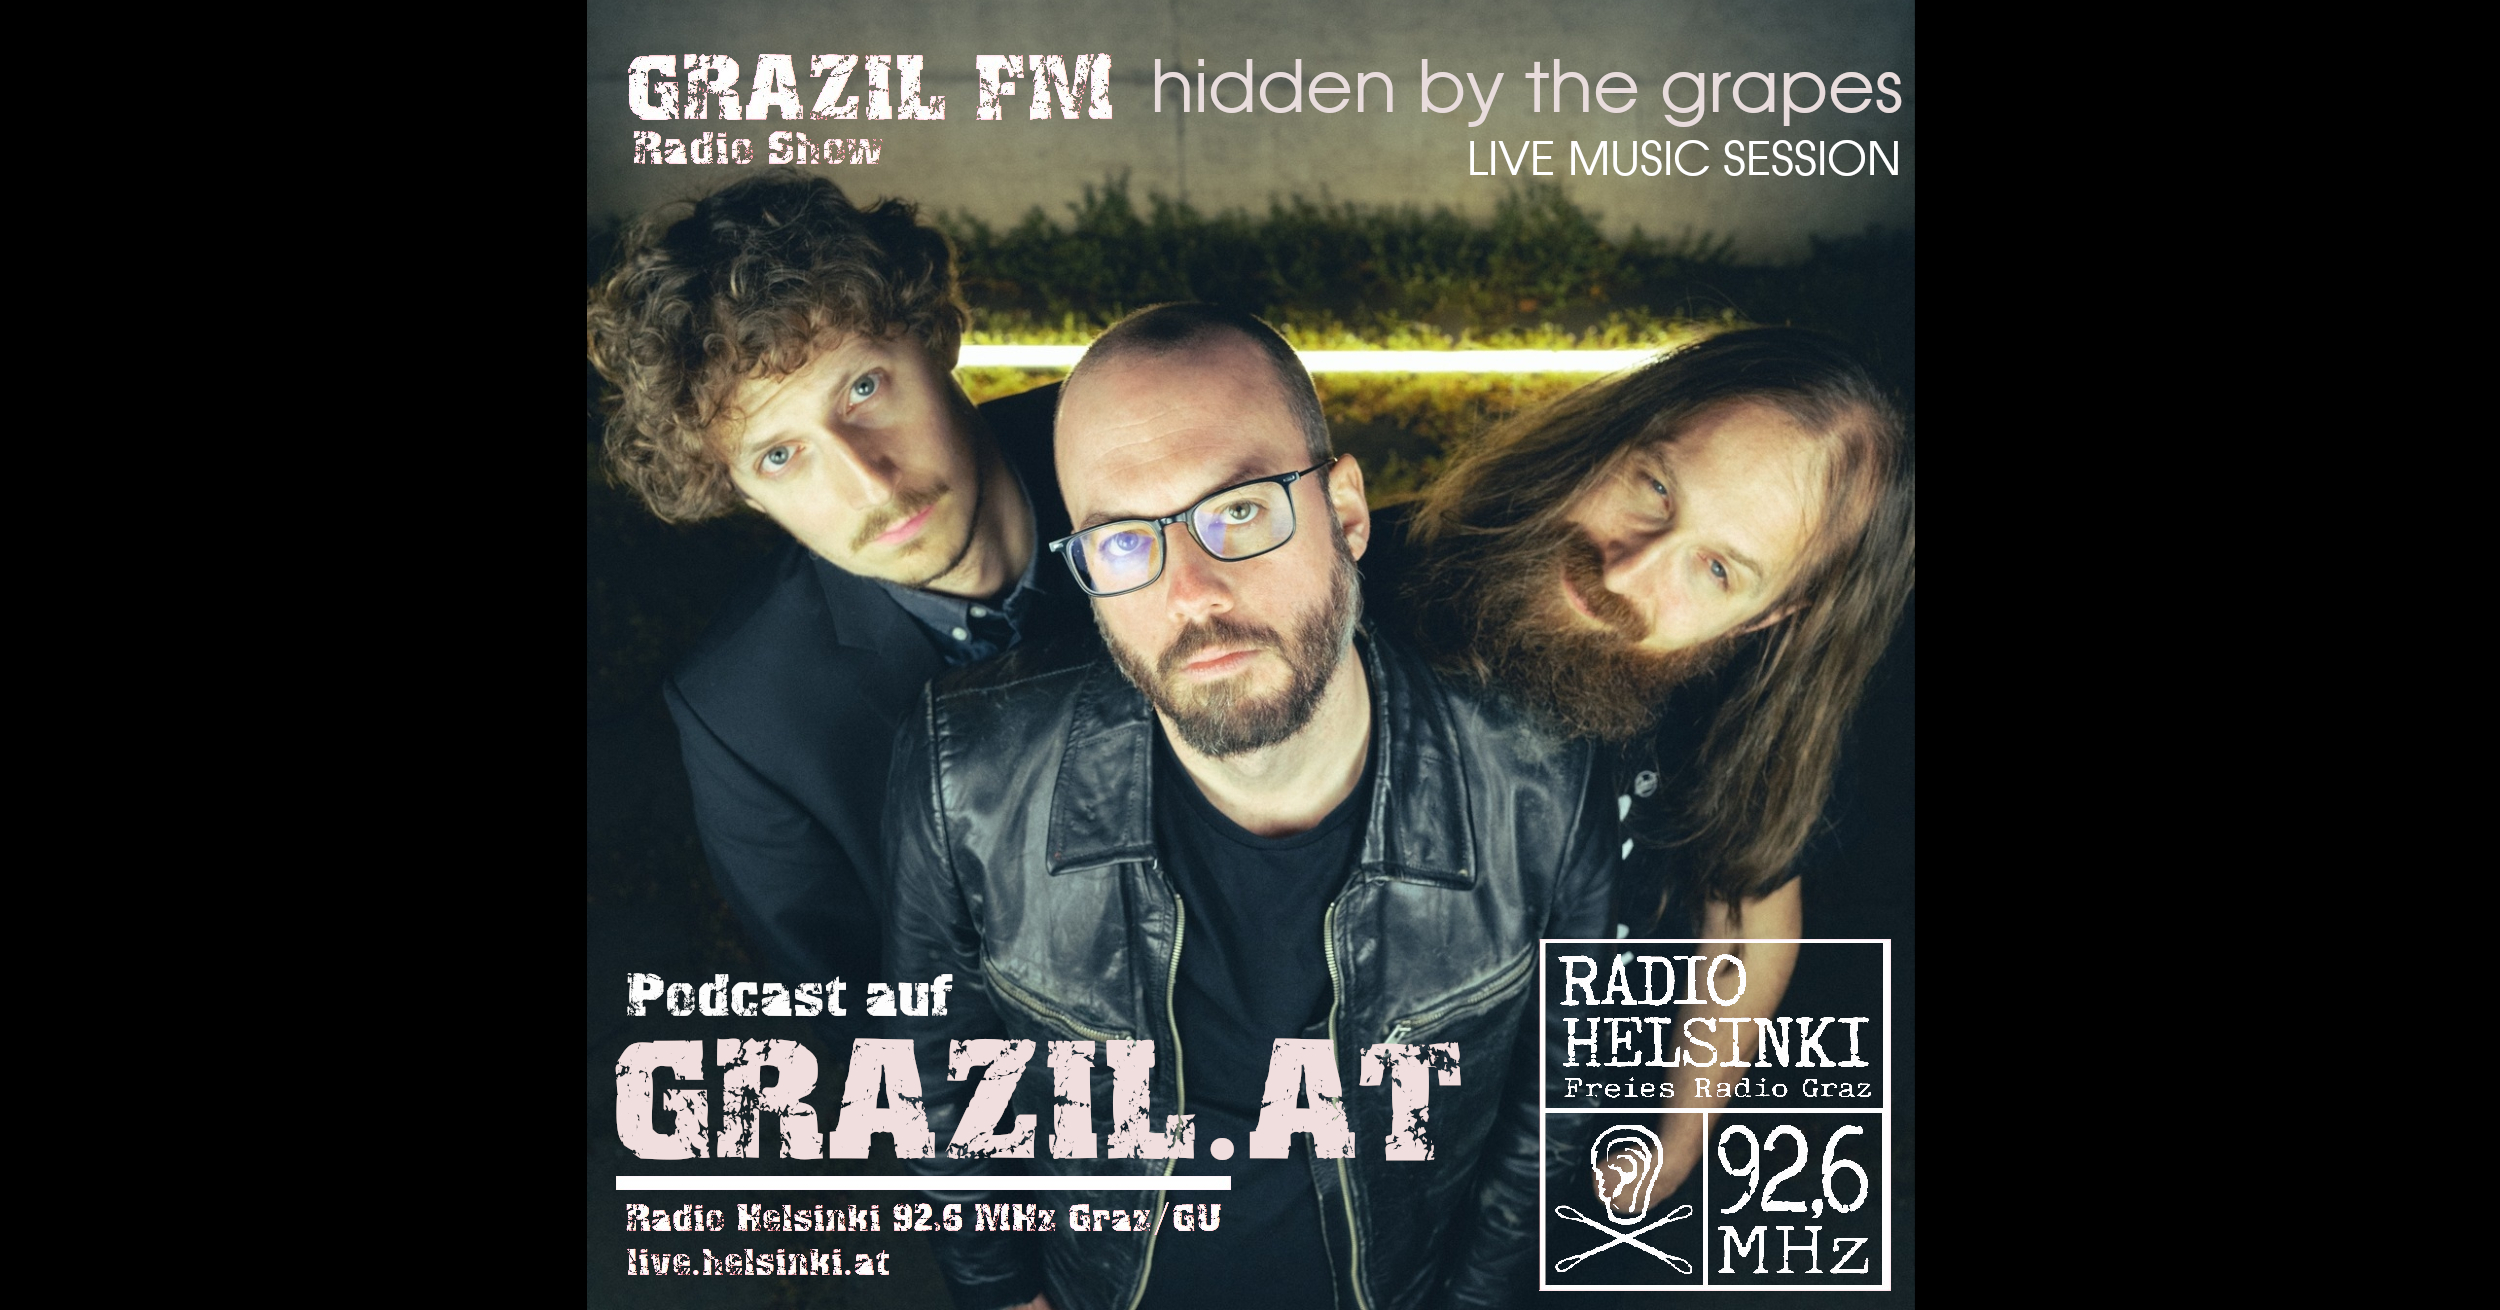 grazil FM hidden by the grapes Live Music Session Radio Helsinki Cle Pecher